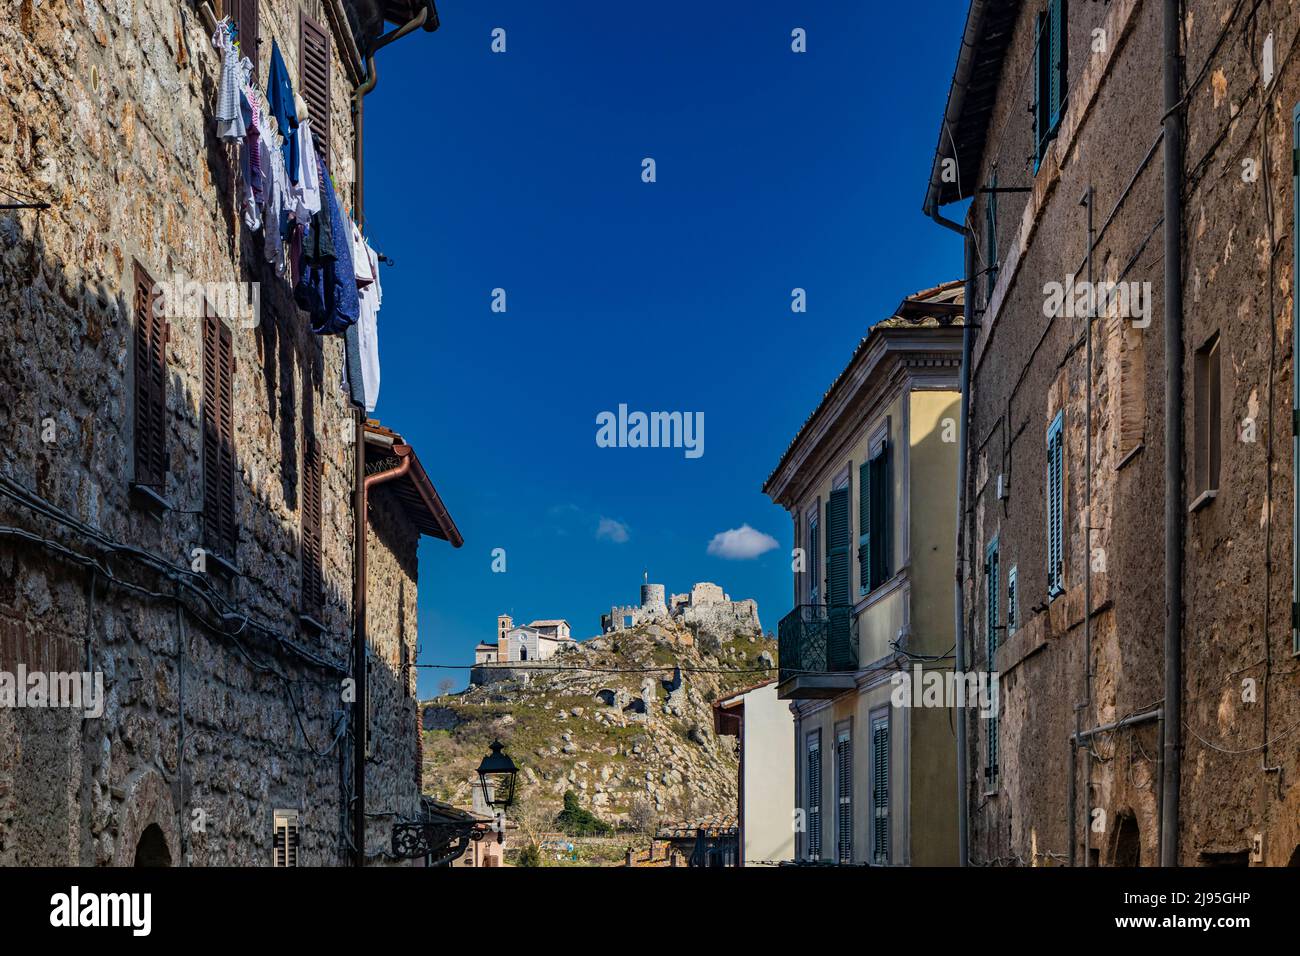 The small village of Tolfa, in Lazio. The view of the fortress and the church of the Sanctuary at the top of the cliff. A glimpse of the town with its Stock Photo